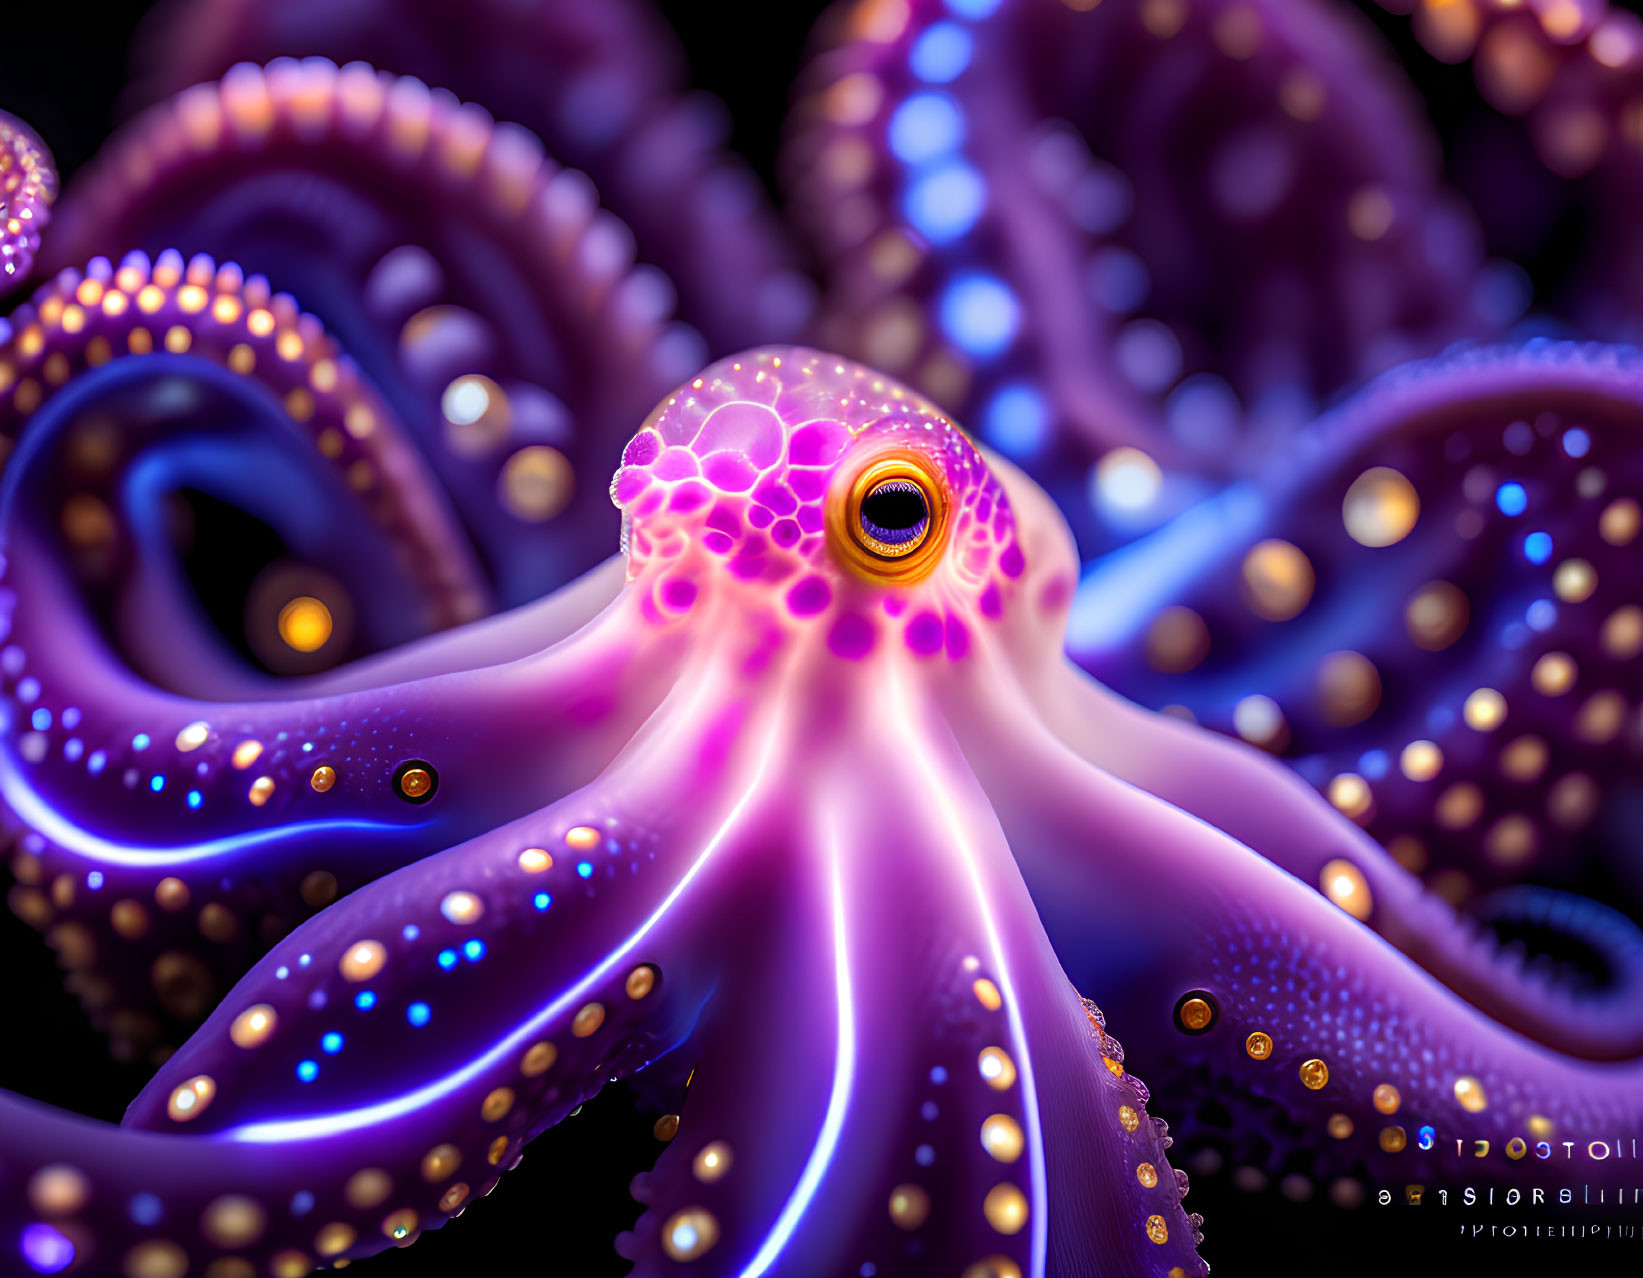 Vibrant digital art featuring a purple octopus with luminescent blue spots